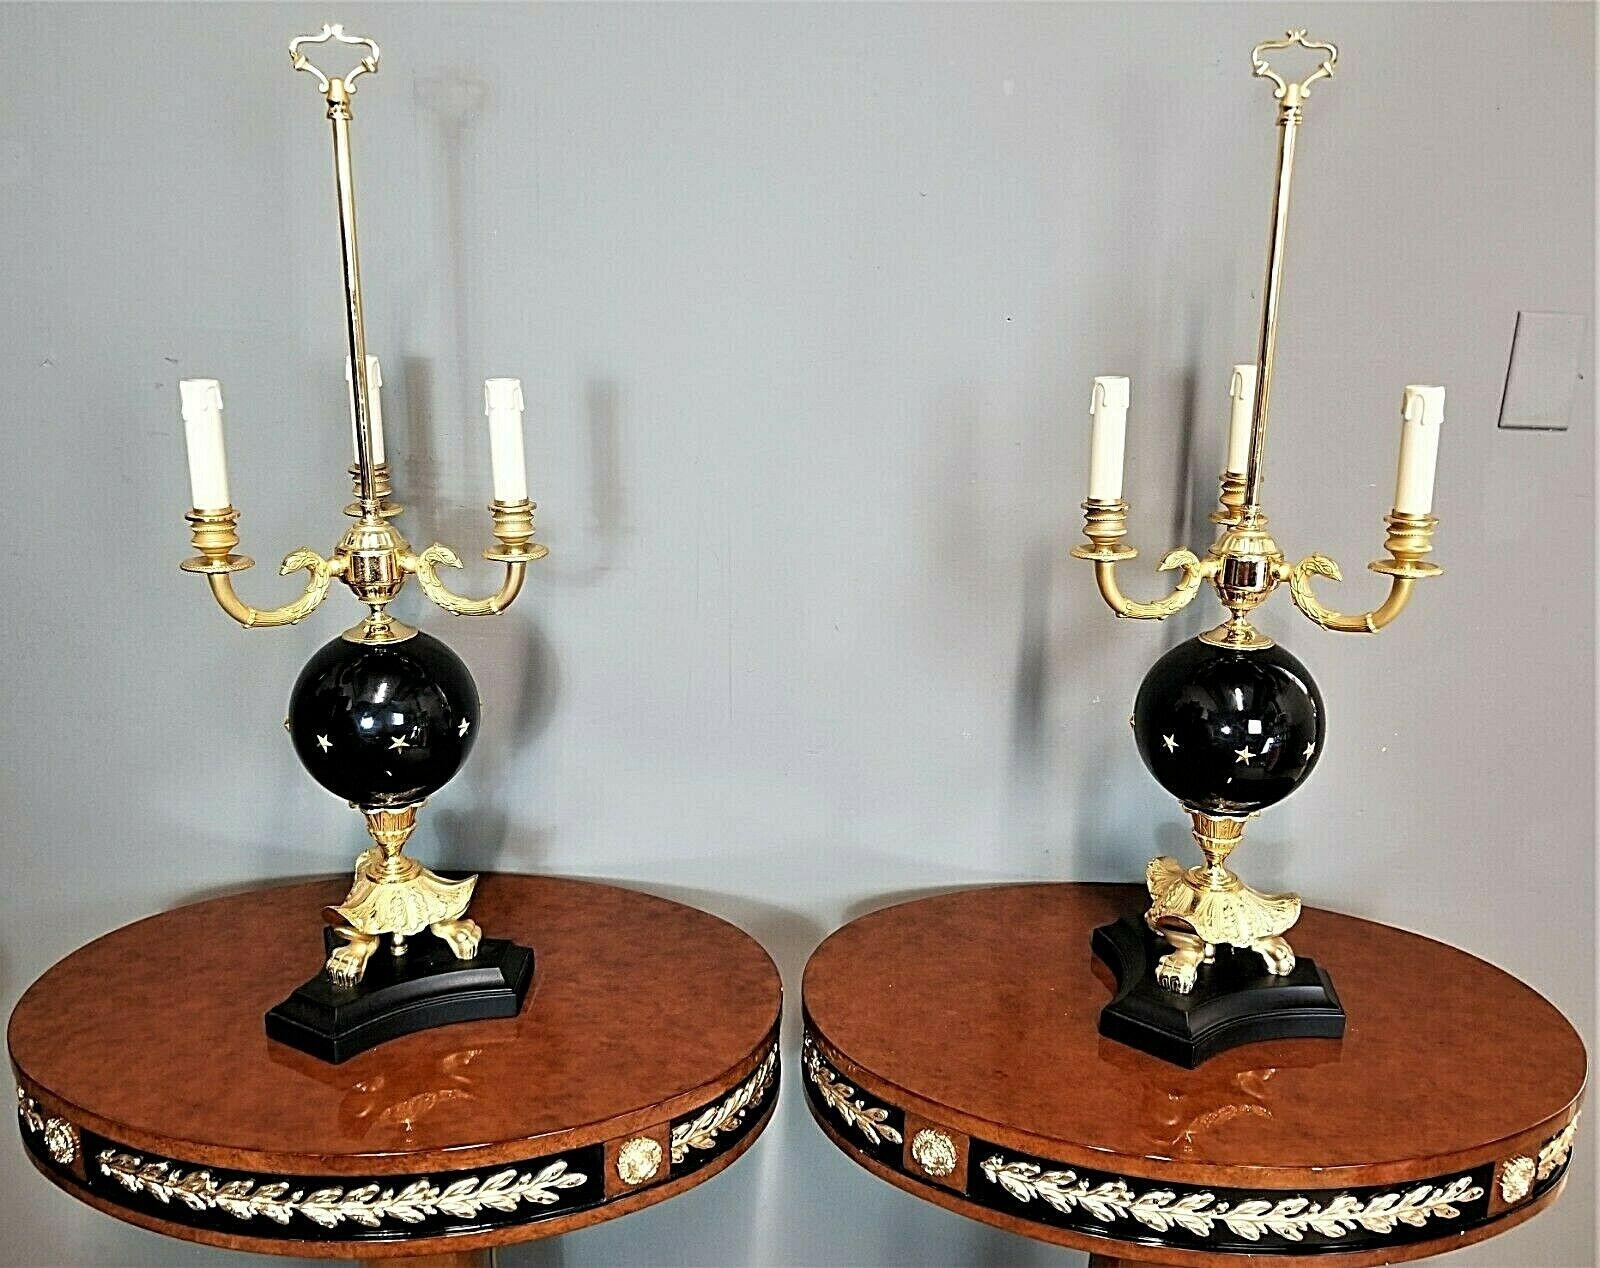 Offering One Of Our Recent Palm Beach Estate Fine Lighting Acquisitions Of A
Pair of LAUDARTE Gilt Versace Billouette Candelabra Table Lamps Made in Italy
Featuring gilt metal, black glass globes surrounded by gold stars and on wood bases.
They